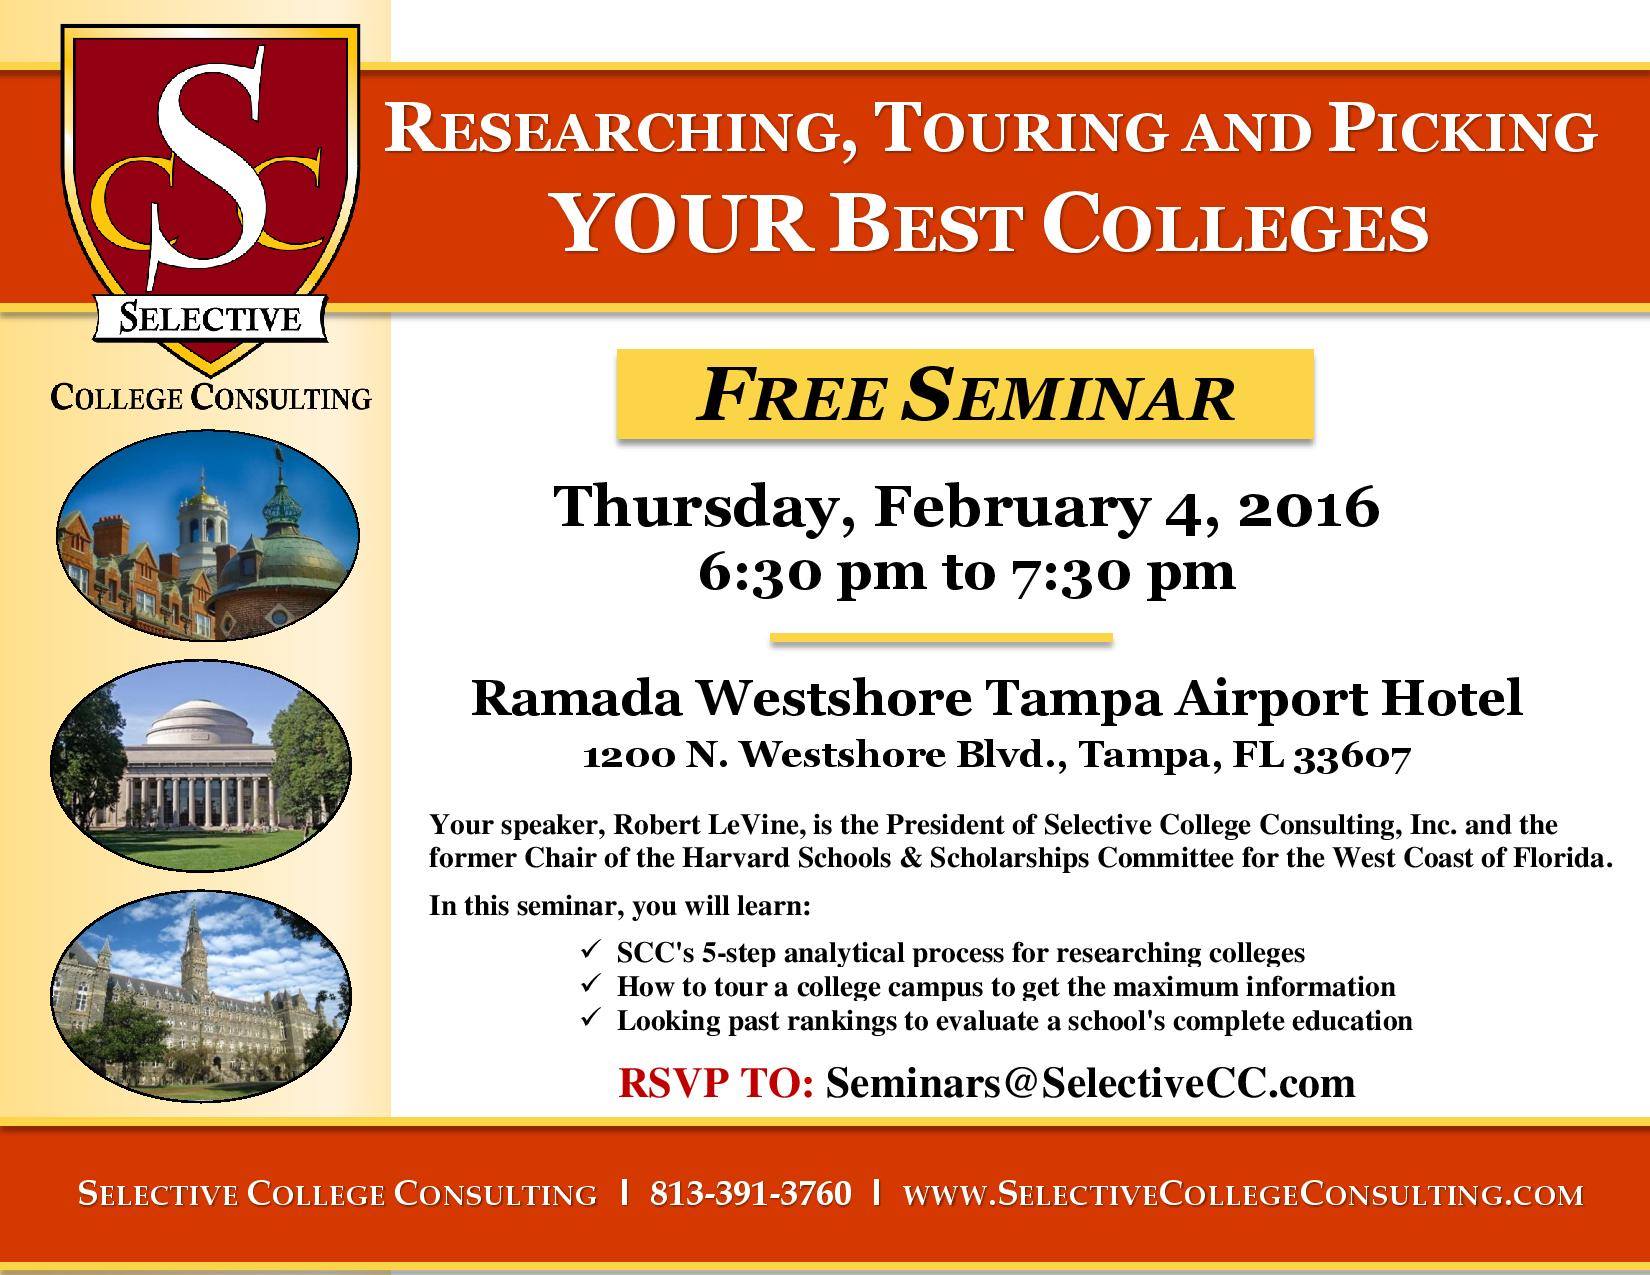 Researching, Touring and Picking Your Best Colleges - FREE Seminar